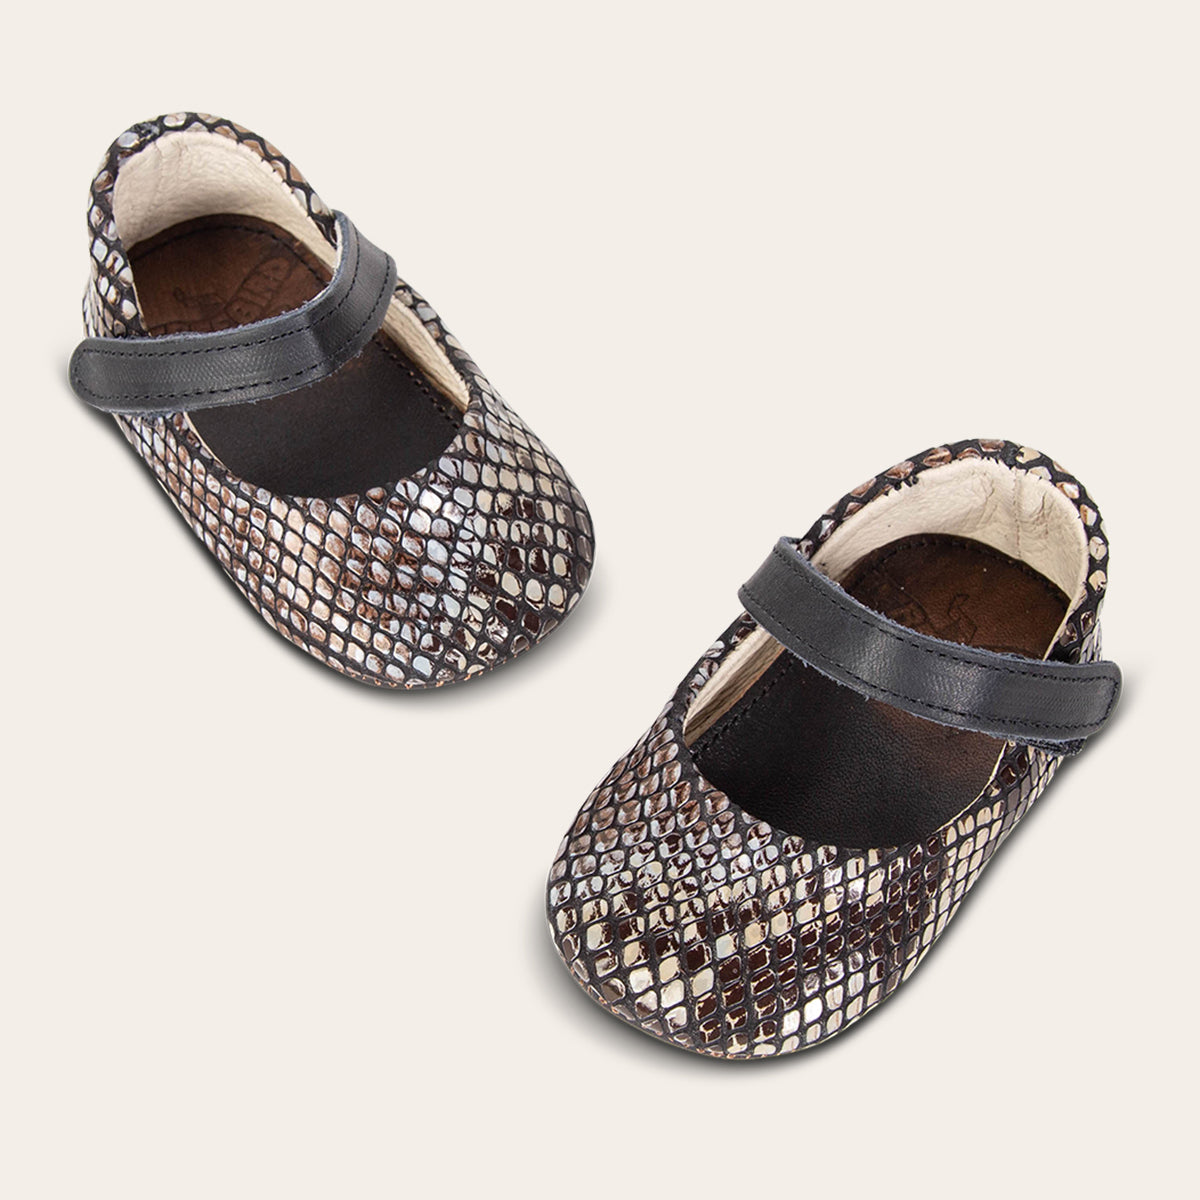 front view showing top leather strap on FREEBIRD infant baby Jane blue snake leather shoe